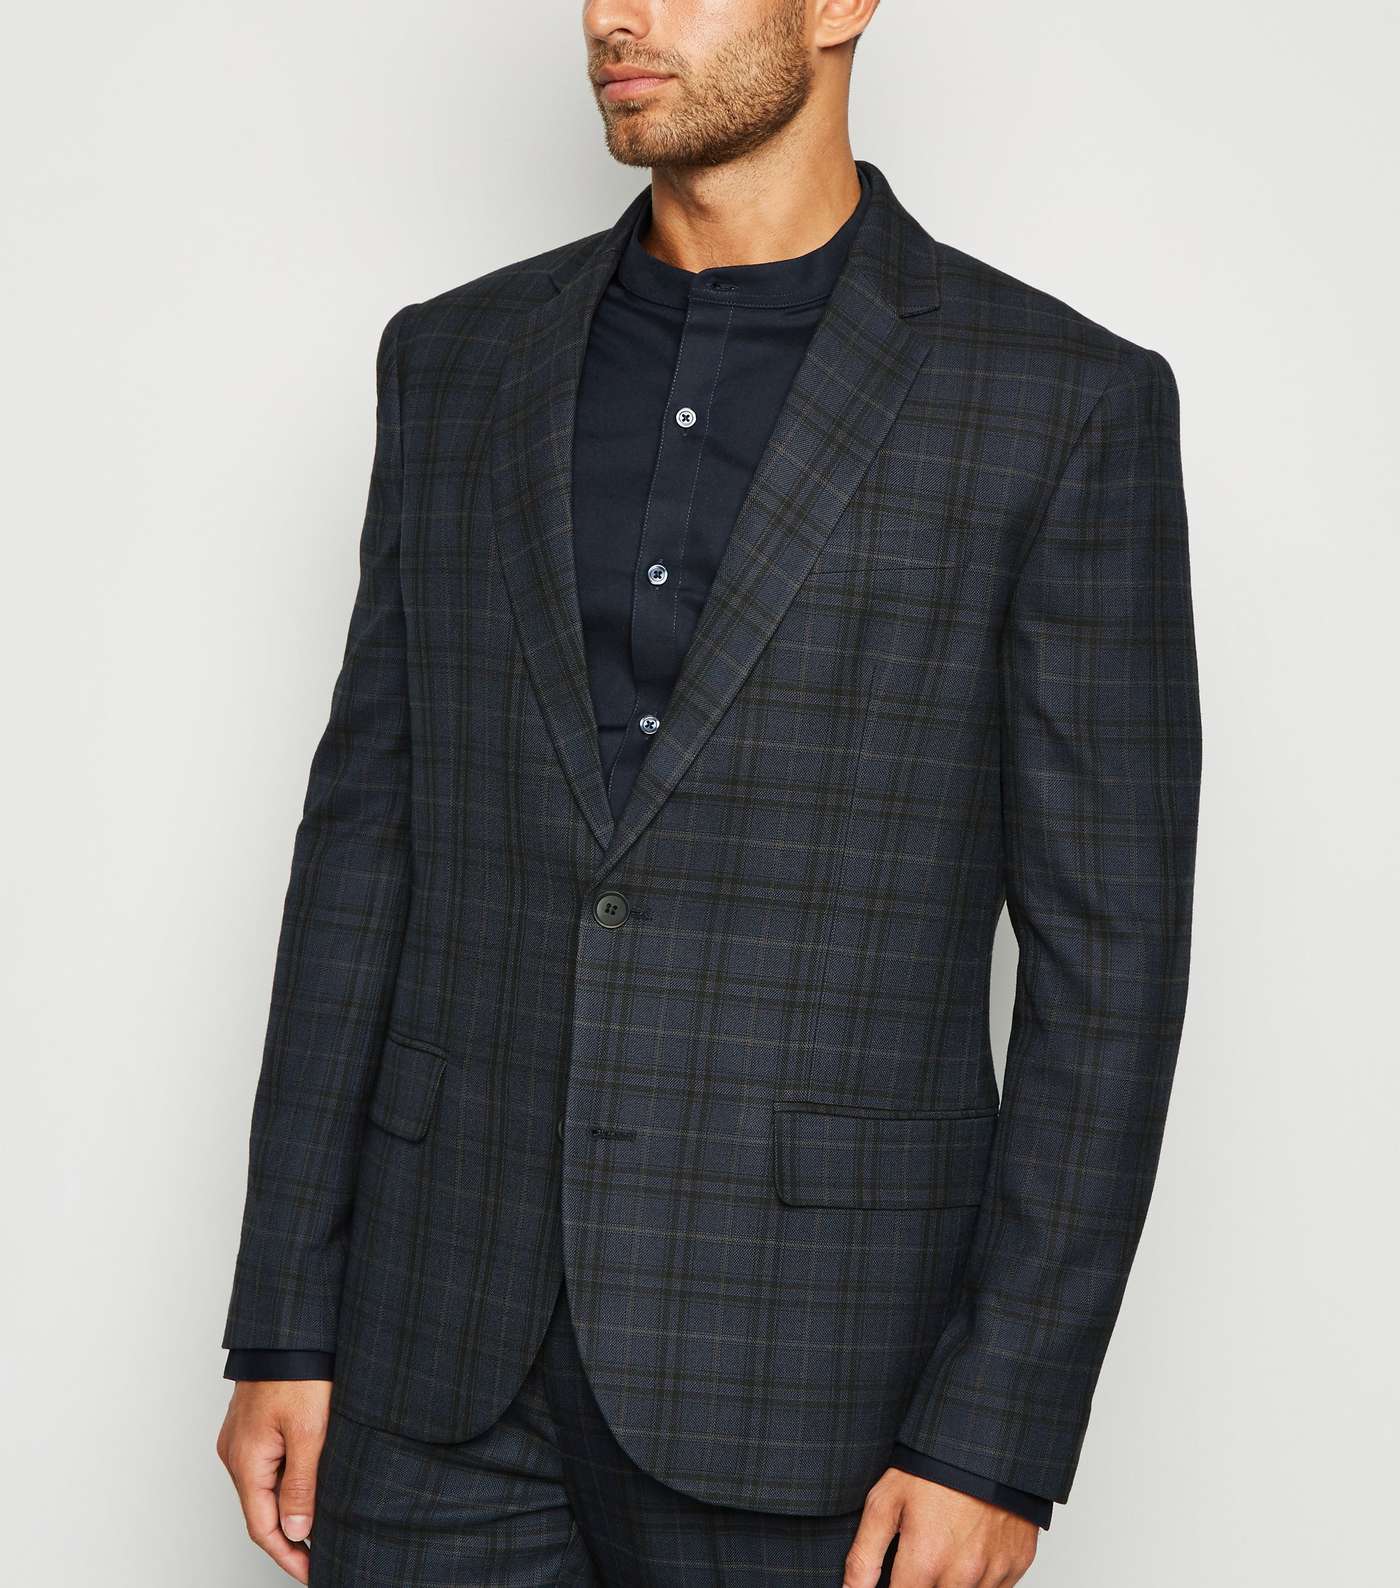 Navy Check Suit Jacket